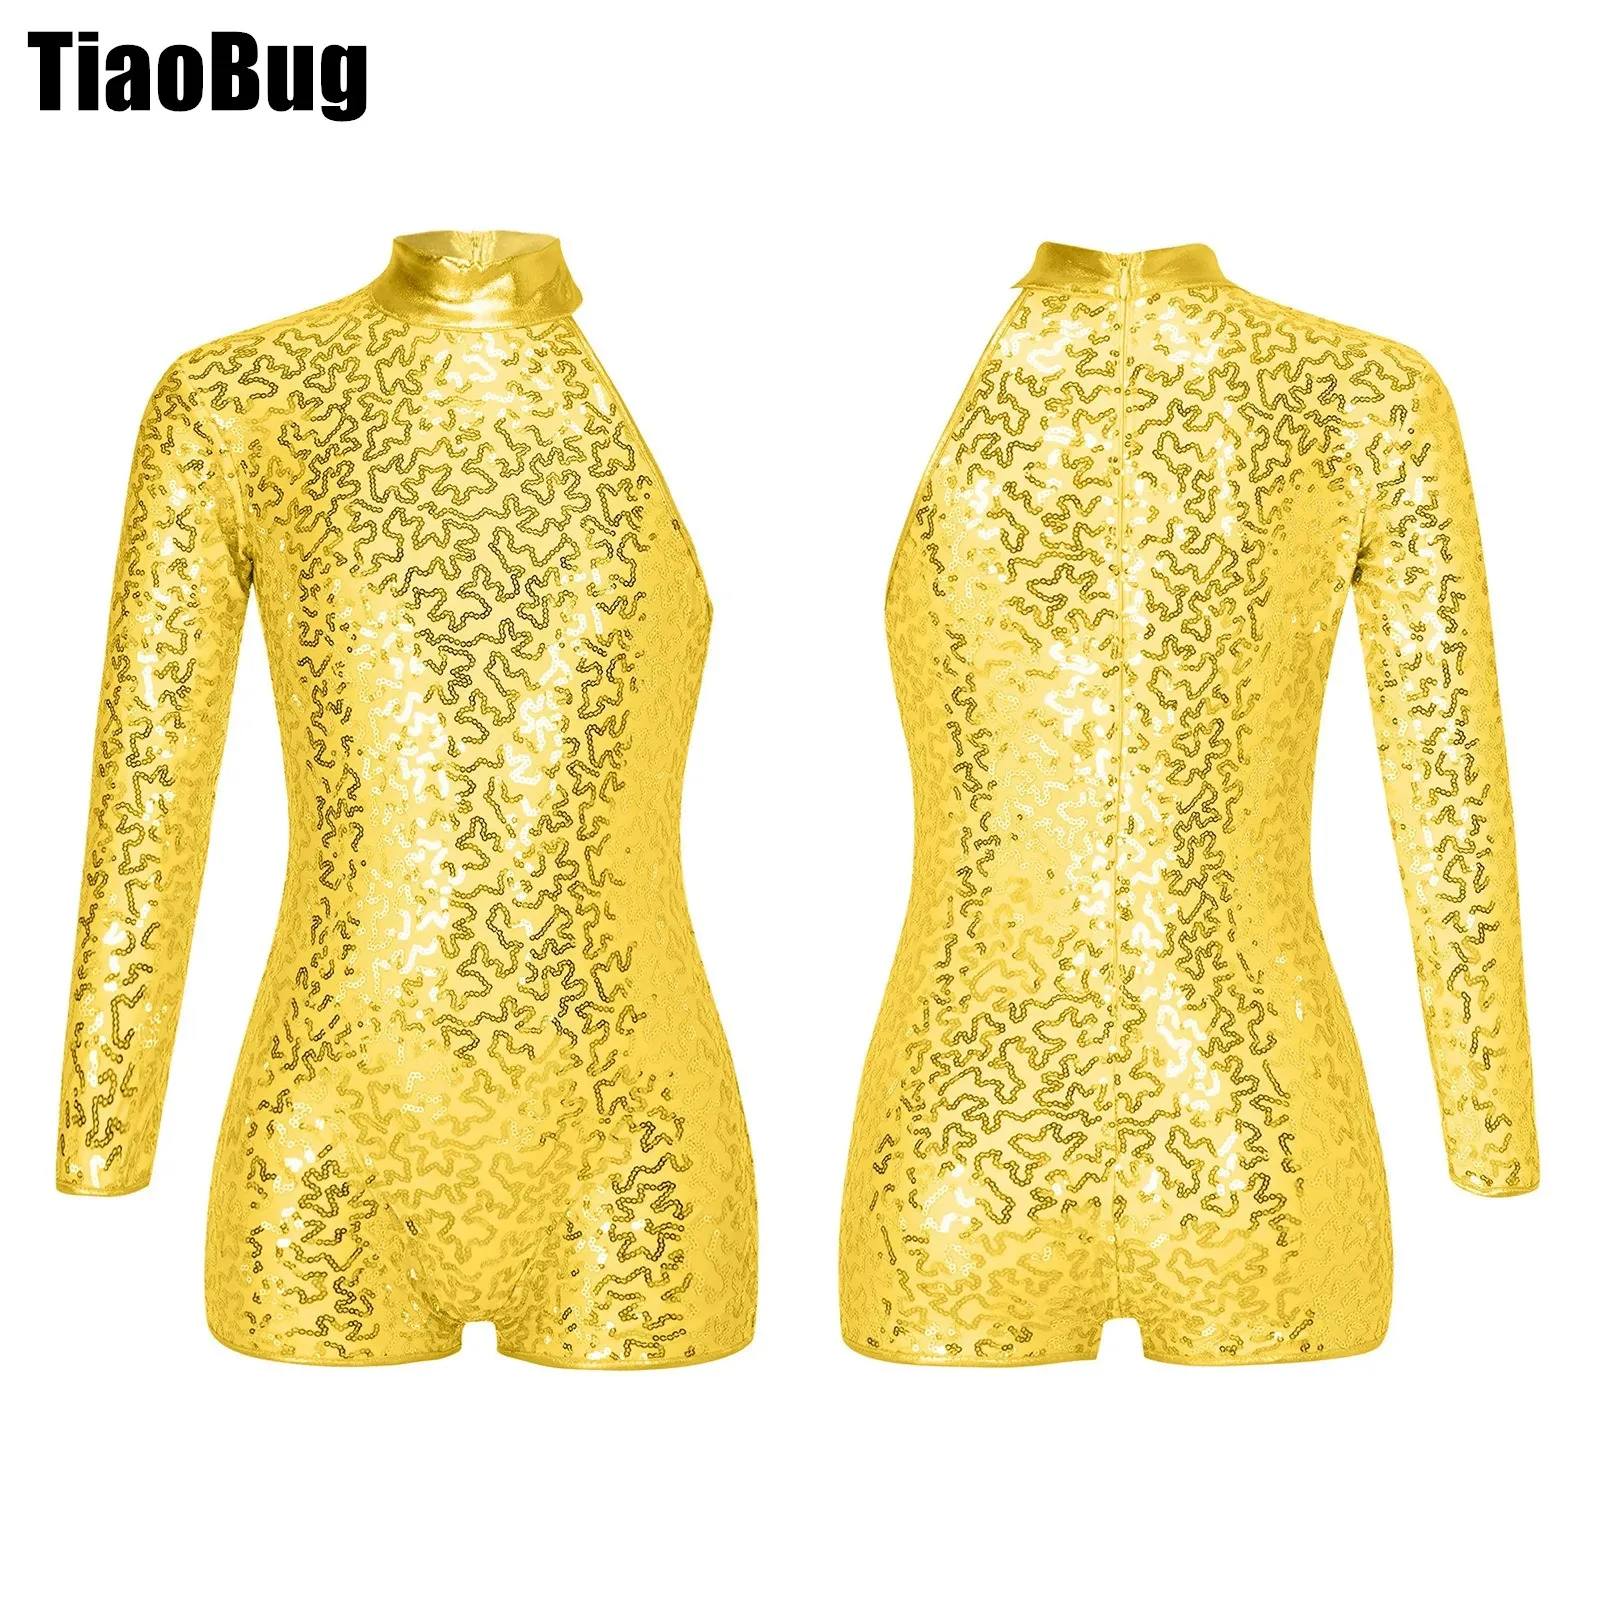 

Kids Girls Sequins Dance Leotards Single Long Sleeve Texture Decorated Invisible Zipper Closure Back Jazz Shiny Jumpsuit